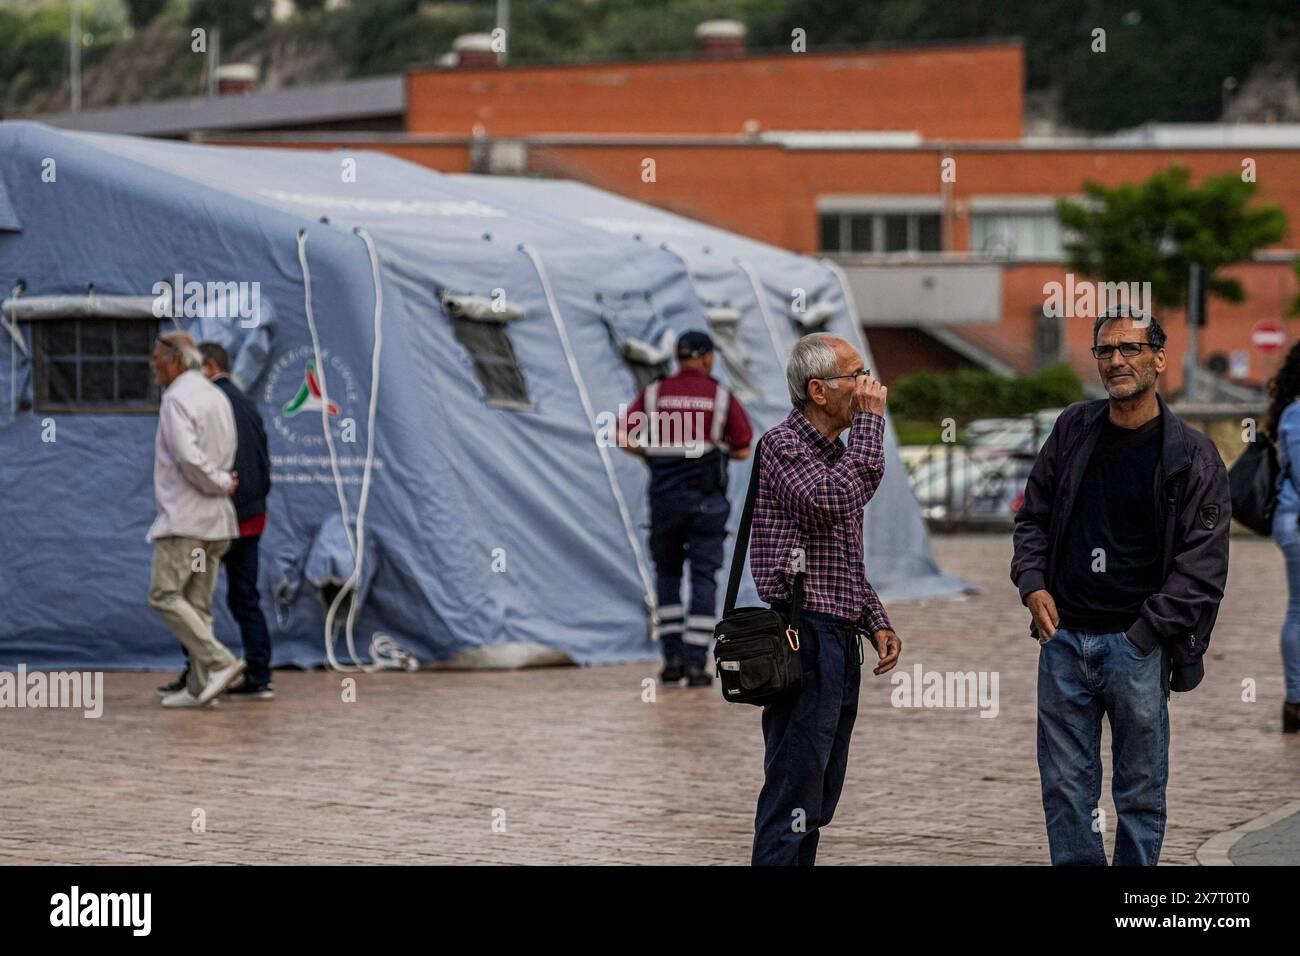 News - Campi Flegrei, the day after the tremors Citizens of Pozzuoli Naples who spent the night in the two small tent cities set up by the Civil Protection quickly in the port area and in the Pertini seafront area, in Naples, Italy, 21 may 2024. From 7.51pm yesterday, the seismic swarm underway in the Campi Flegrei area recorded, until 12.31am today, approximately 150 earthquakes, the strongest of which was magnitude 4.4, within the Solfatara. Napoli Pozzuoli Italy Copyright: xAntonioxBalascox/xLiveMediax LPN 1364927 Stock Photo